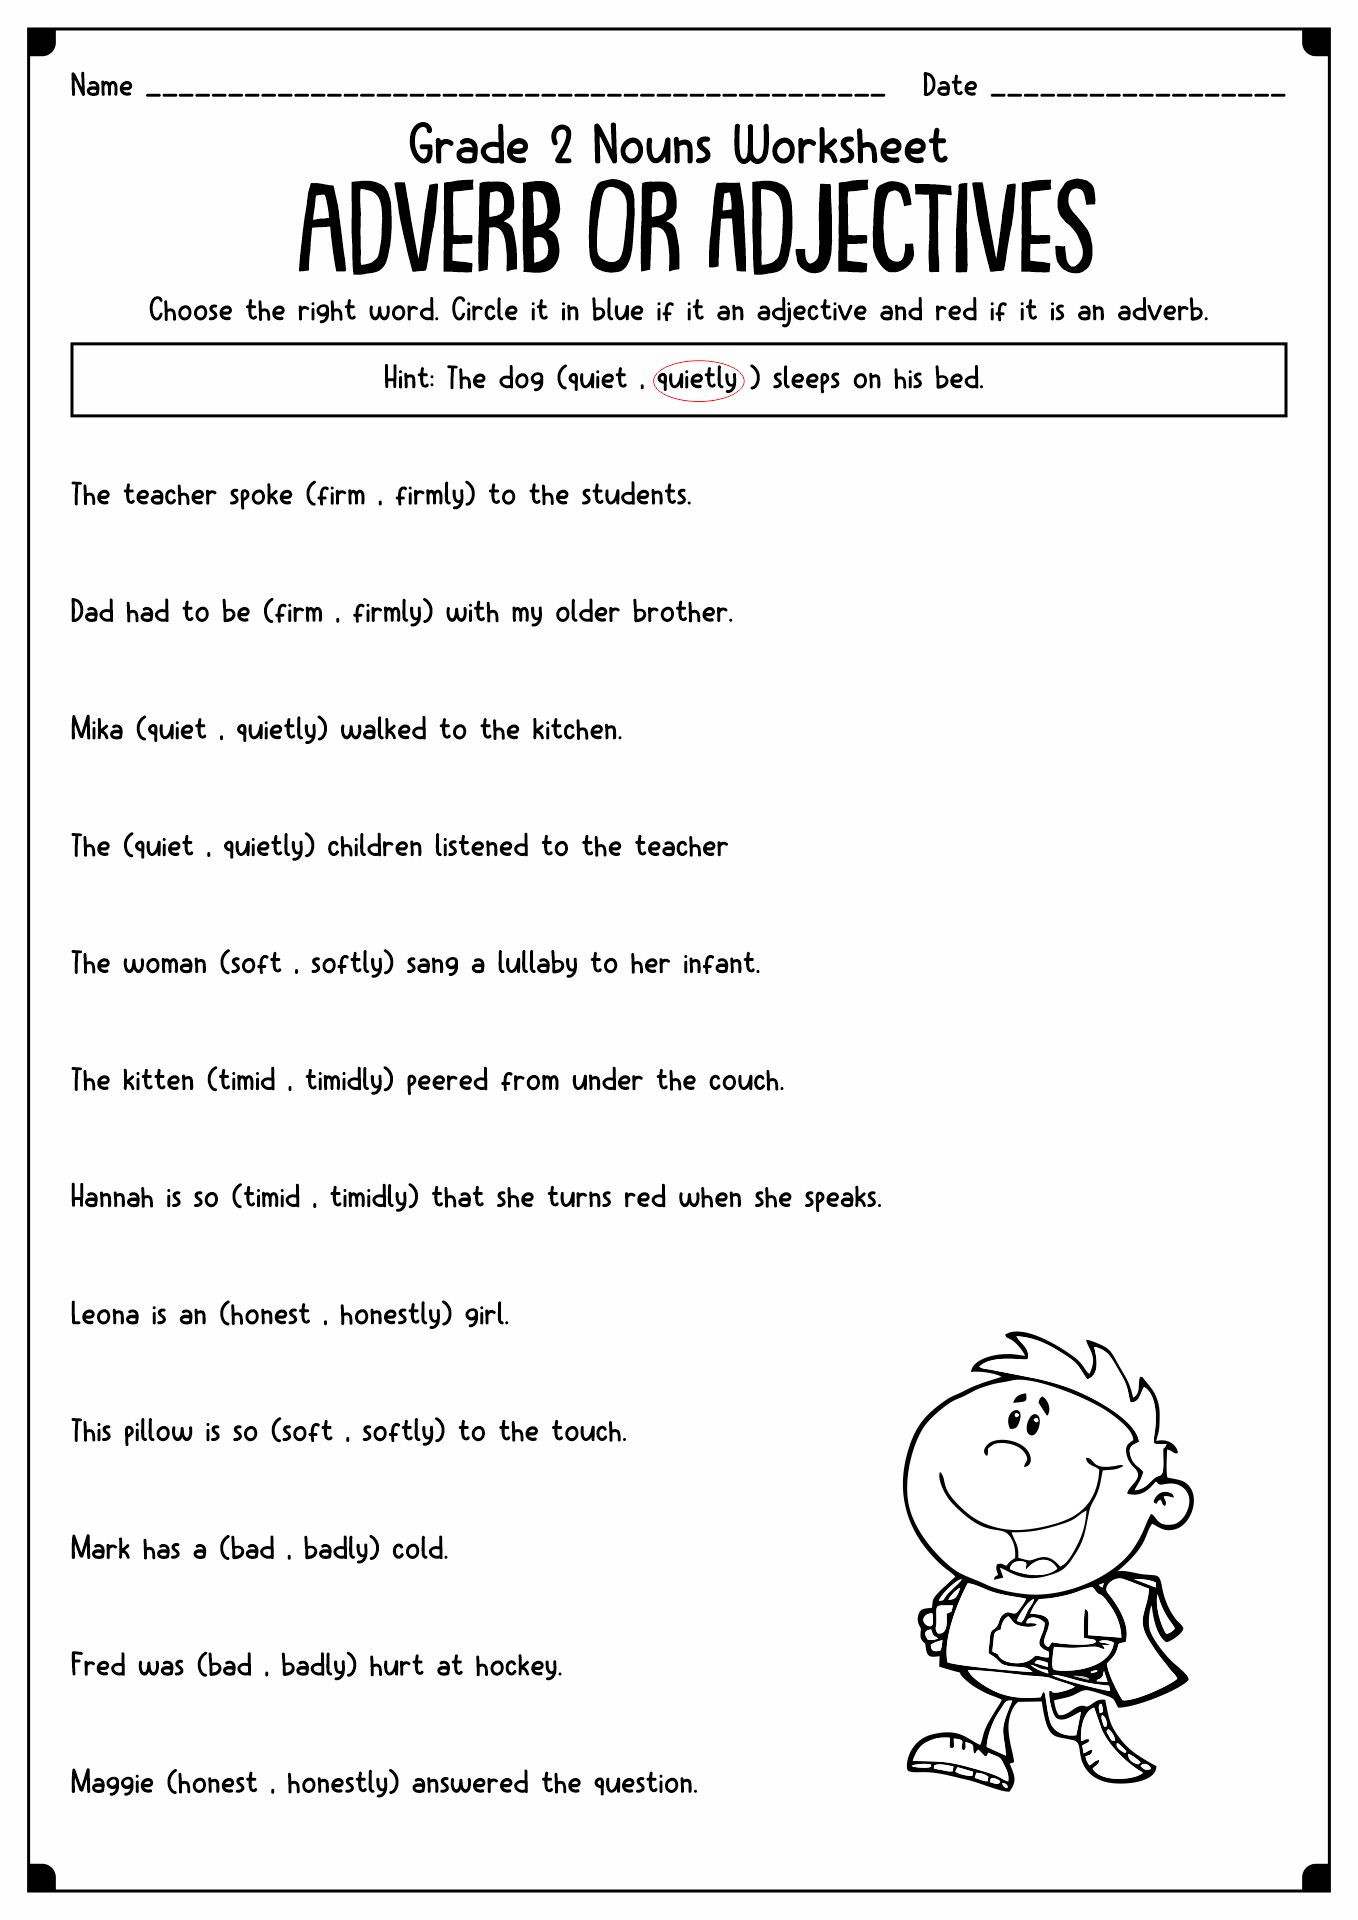 18 Best Images Of Proper Noun Worksheets For First Grade Common And Proper Nouns Worksheets